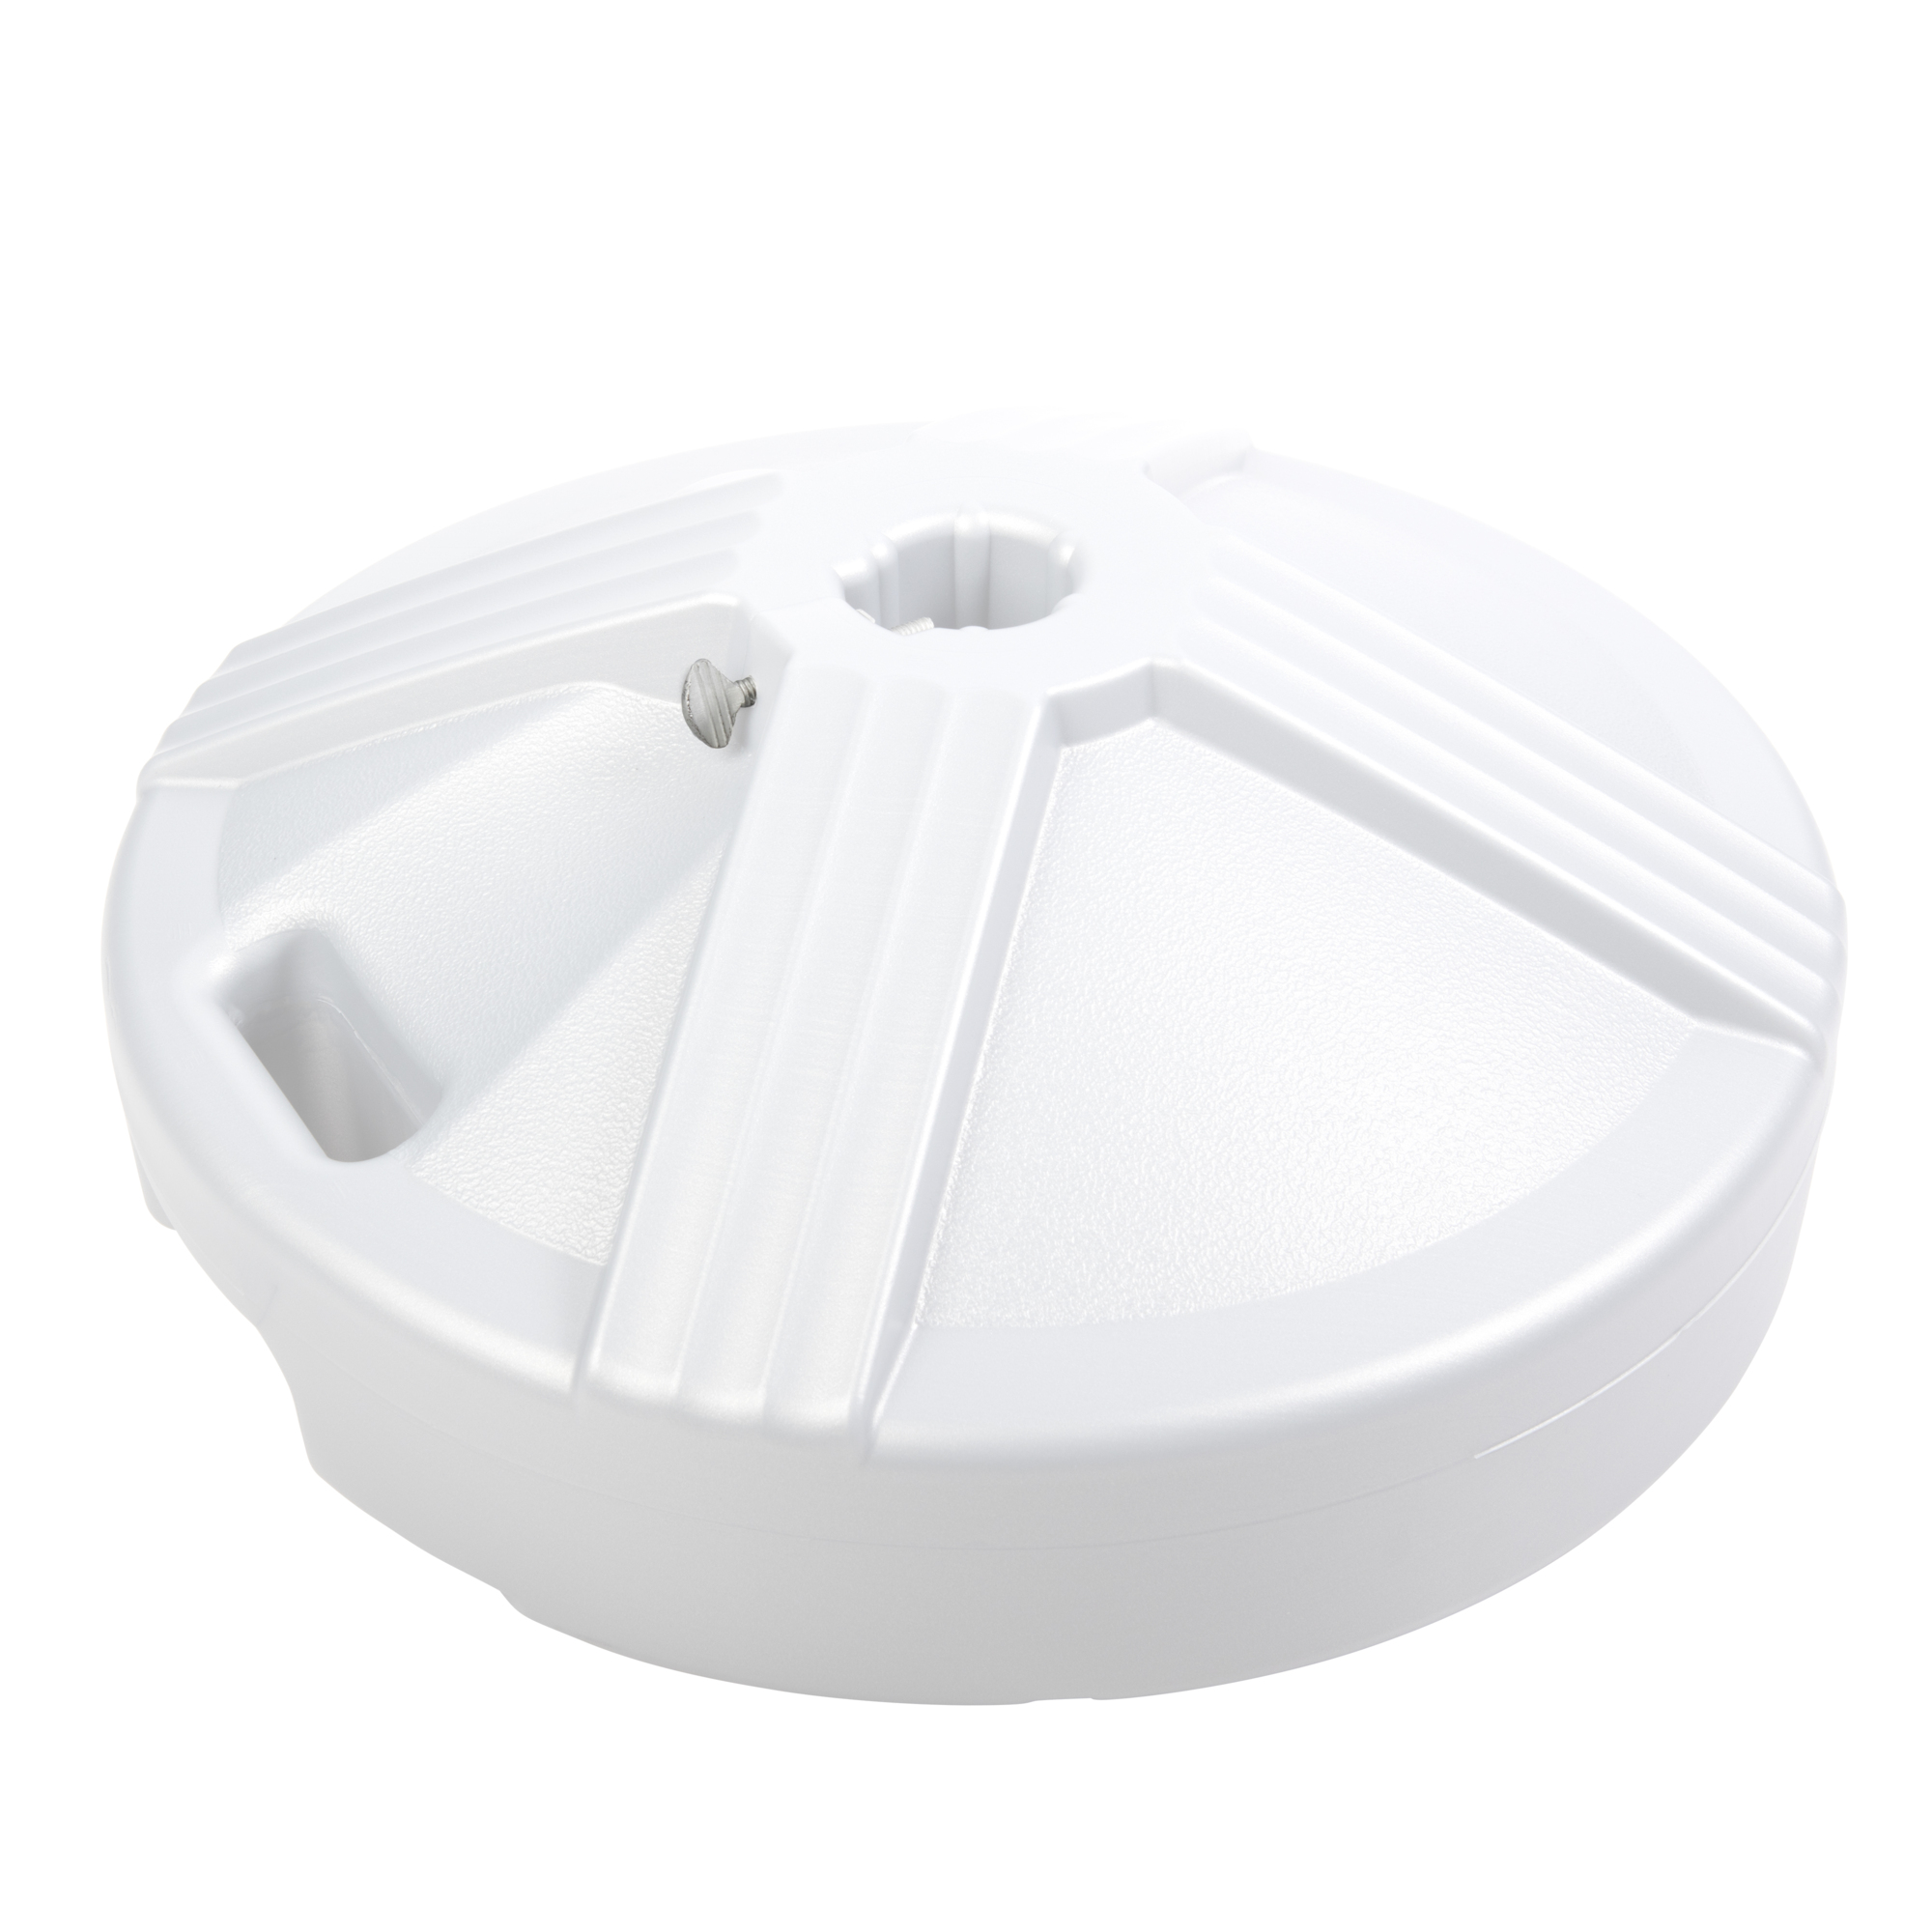 US Weight, Umbrella Base (White) Filled to Approx. 50 lb., Included (qty.) 1 Model FUB1W